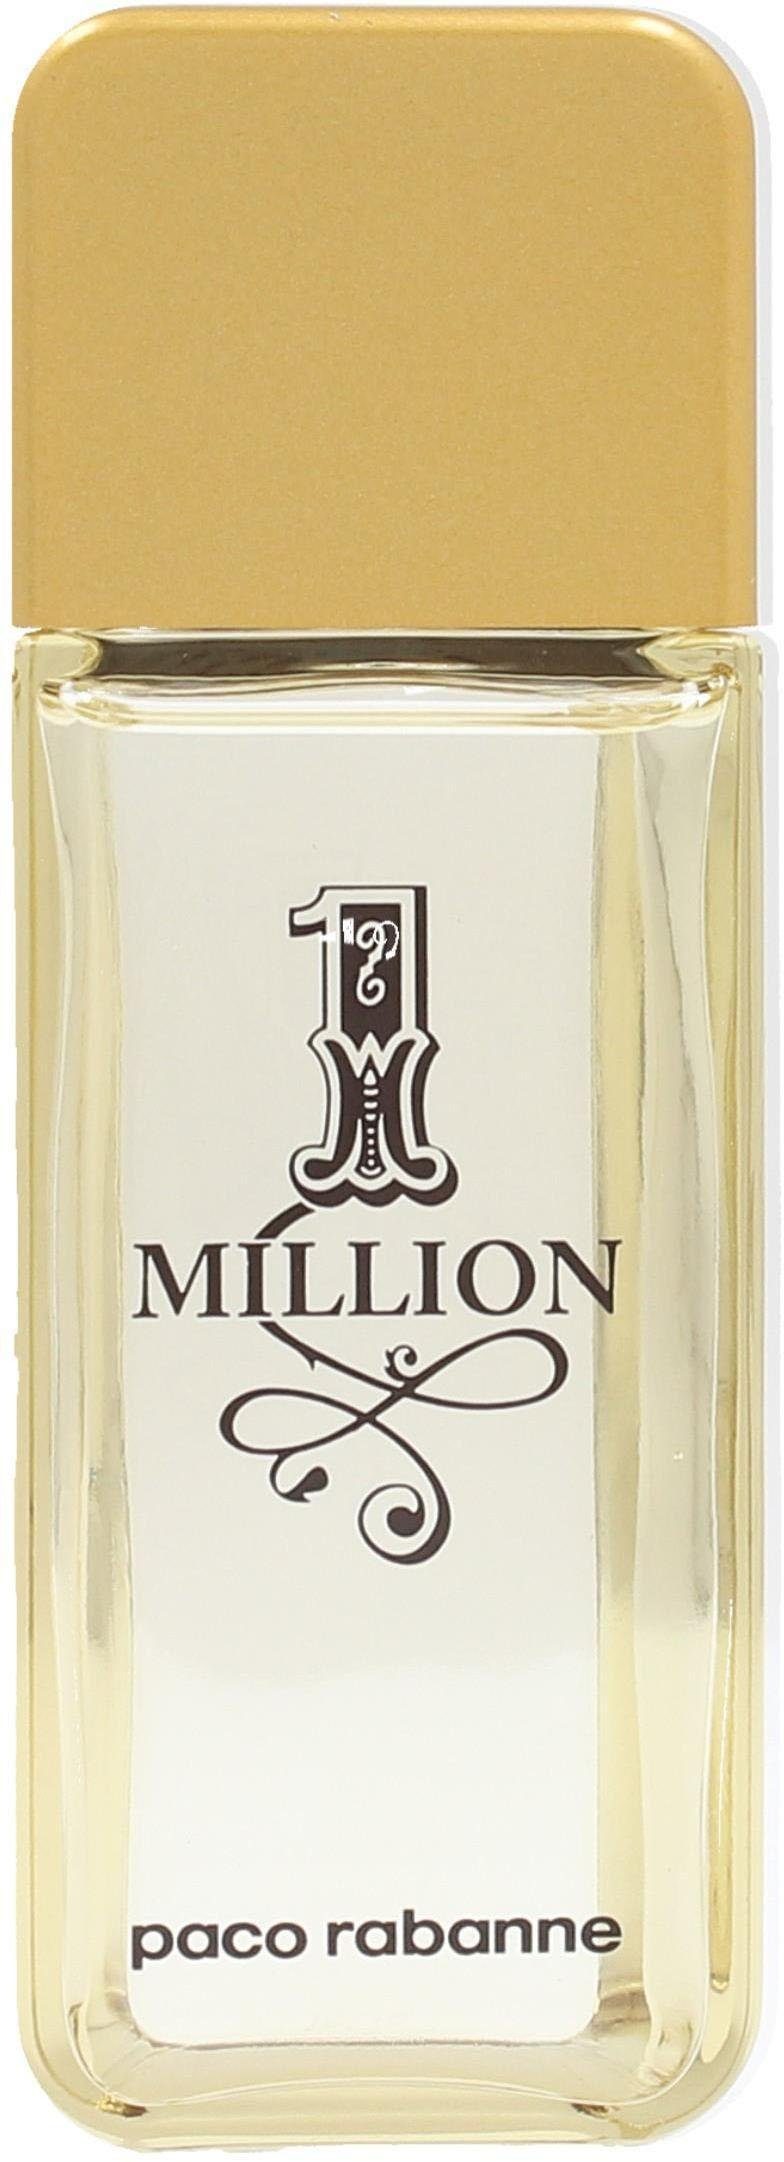 paco rabanne After-Shave Million 1